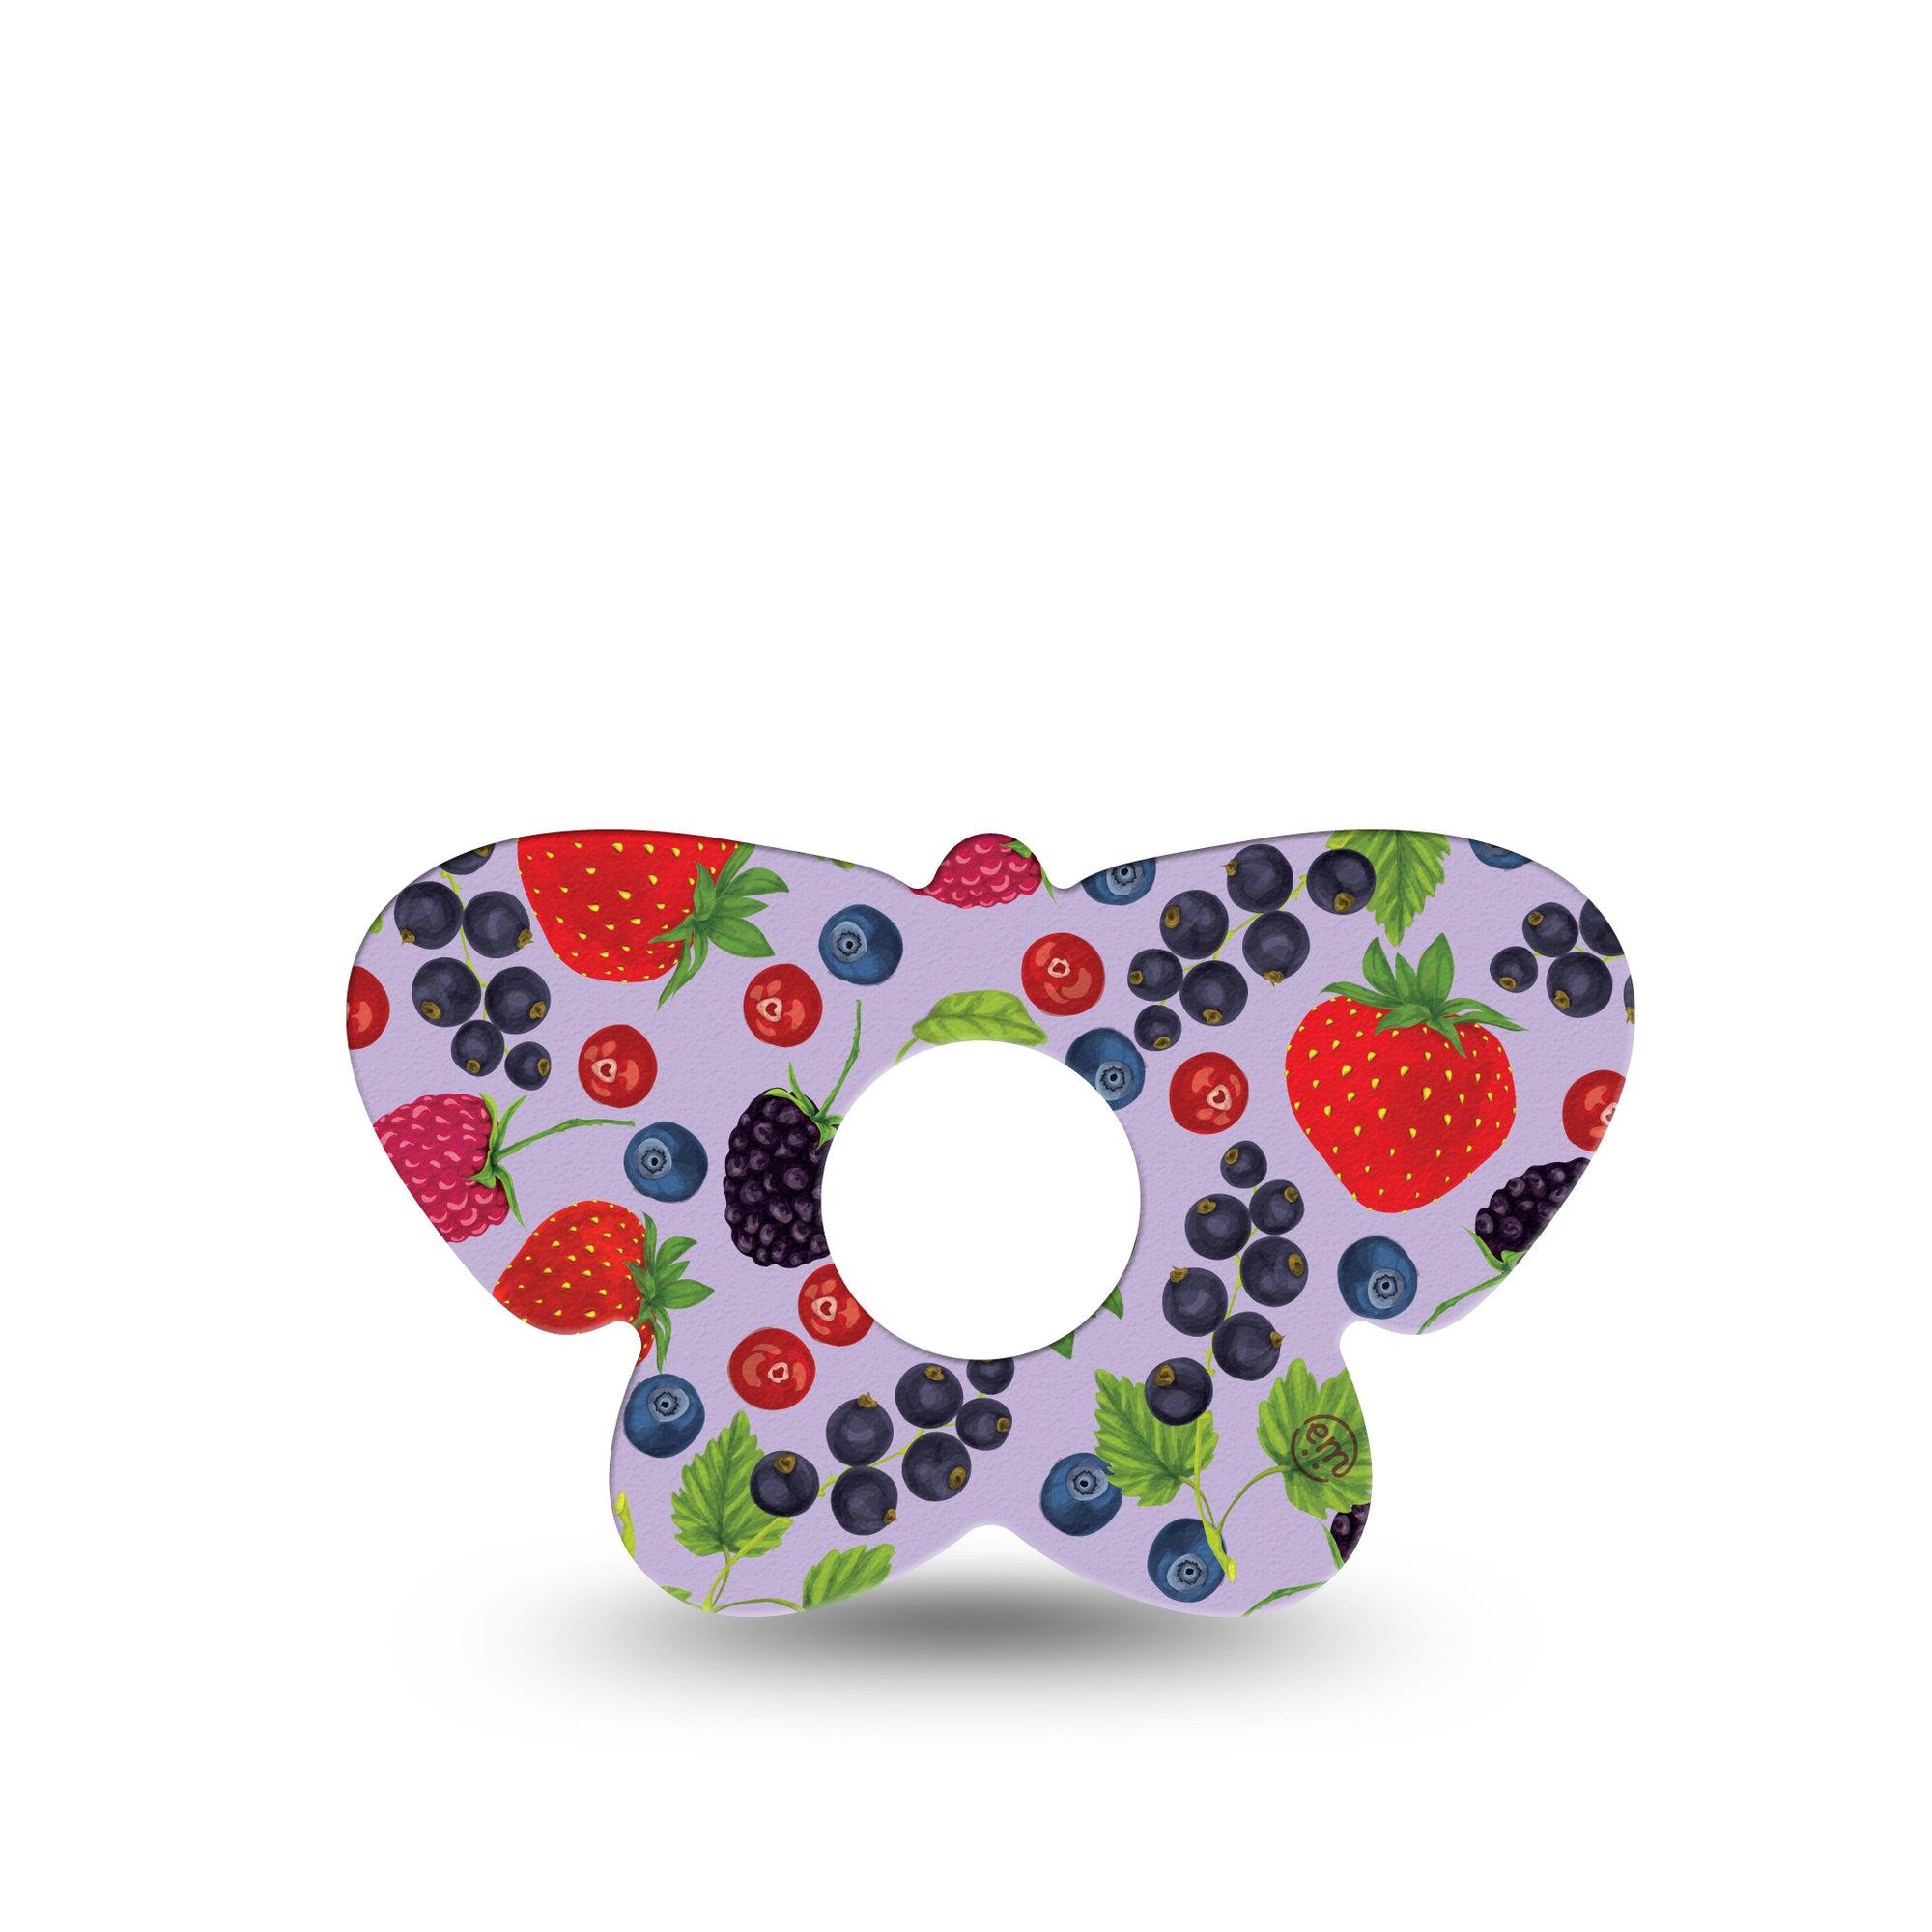 ExpressionMed Wild Berries Butterfly Libre 3 Tape, Single, Fruit Loops Themed, CGM Overlay Patch Design